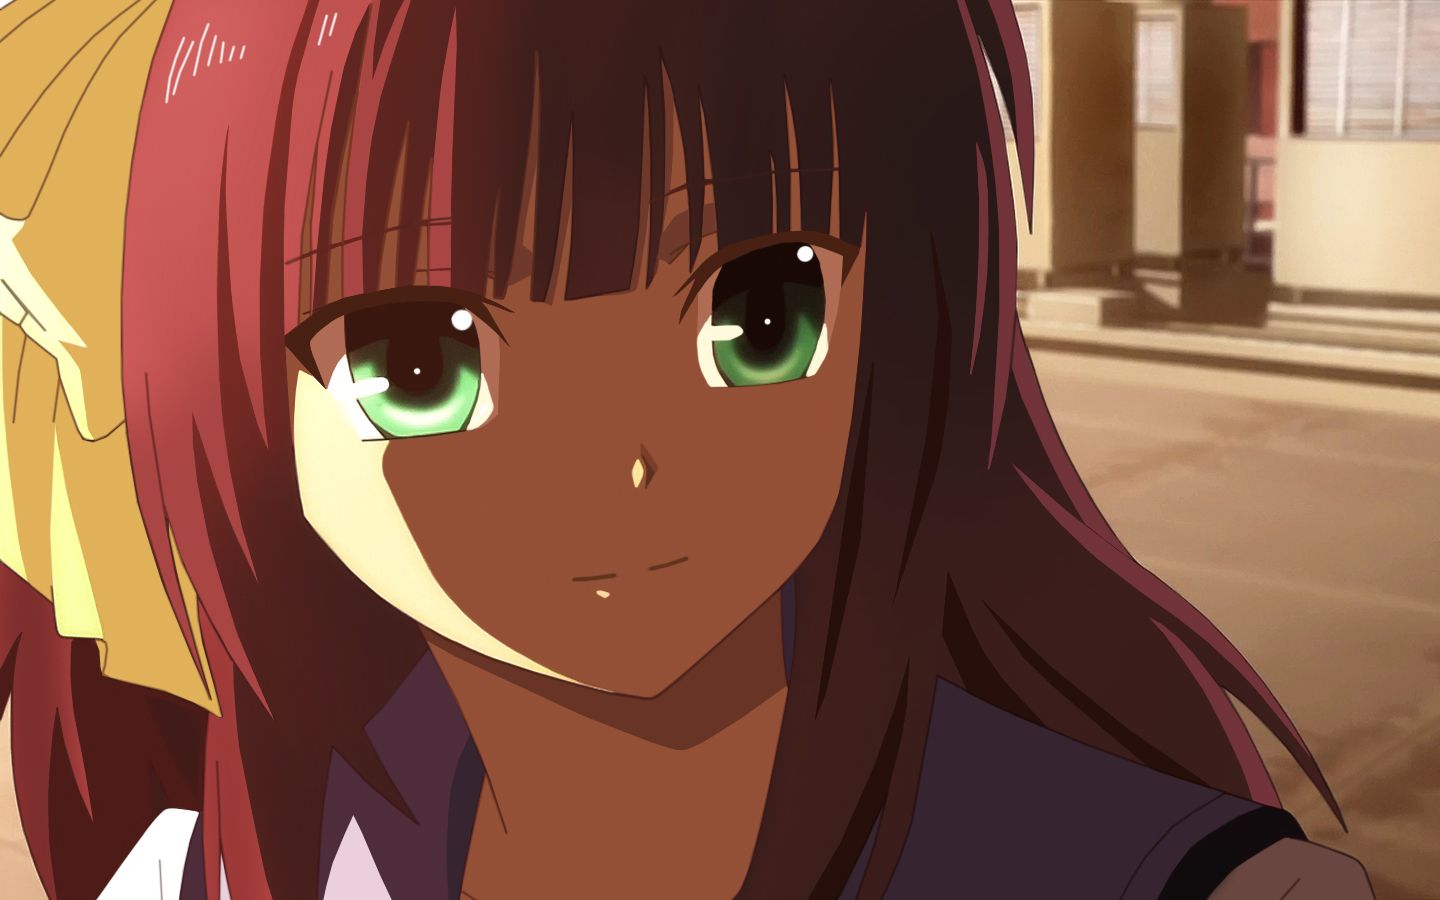 Download wallpaper from anime Angel Beats! with tags: Yuri Nakamura, Full screen